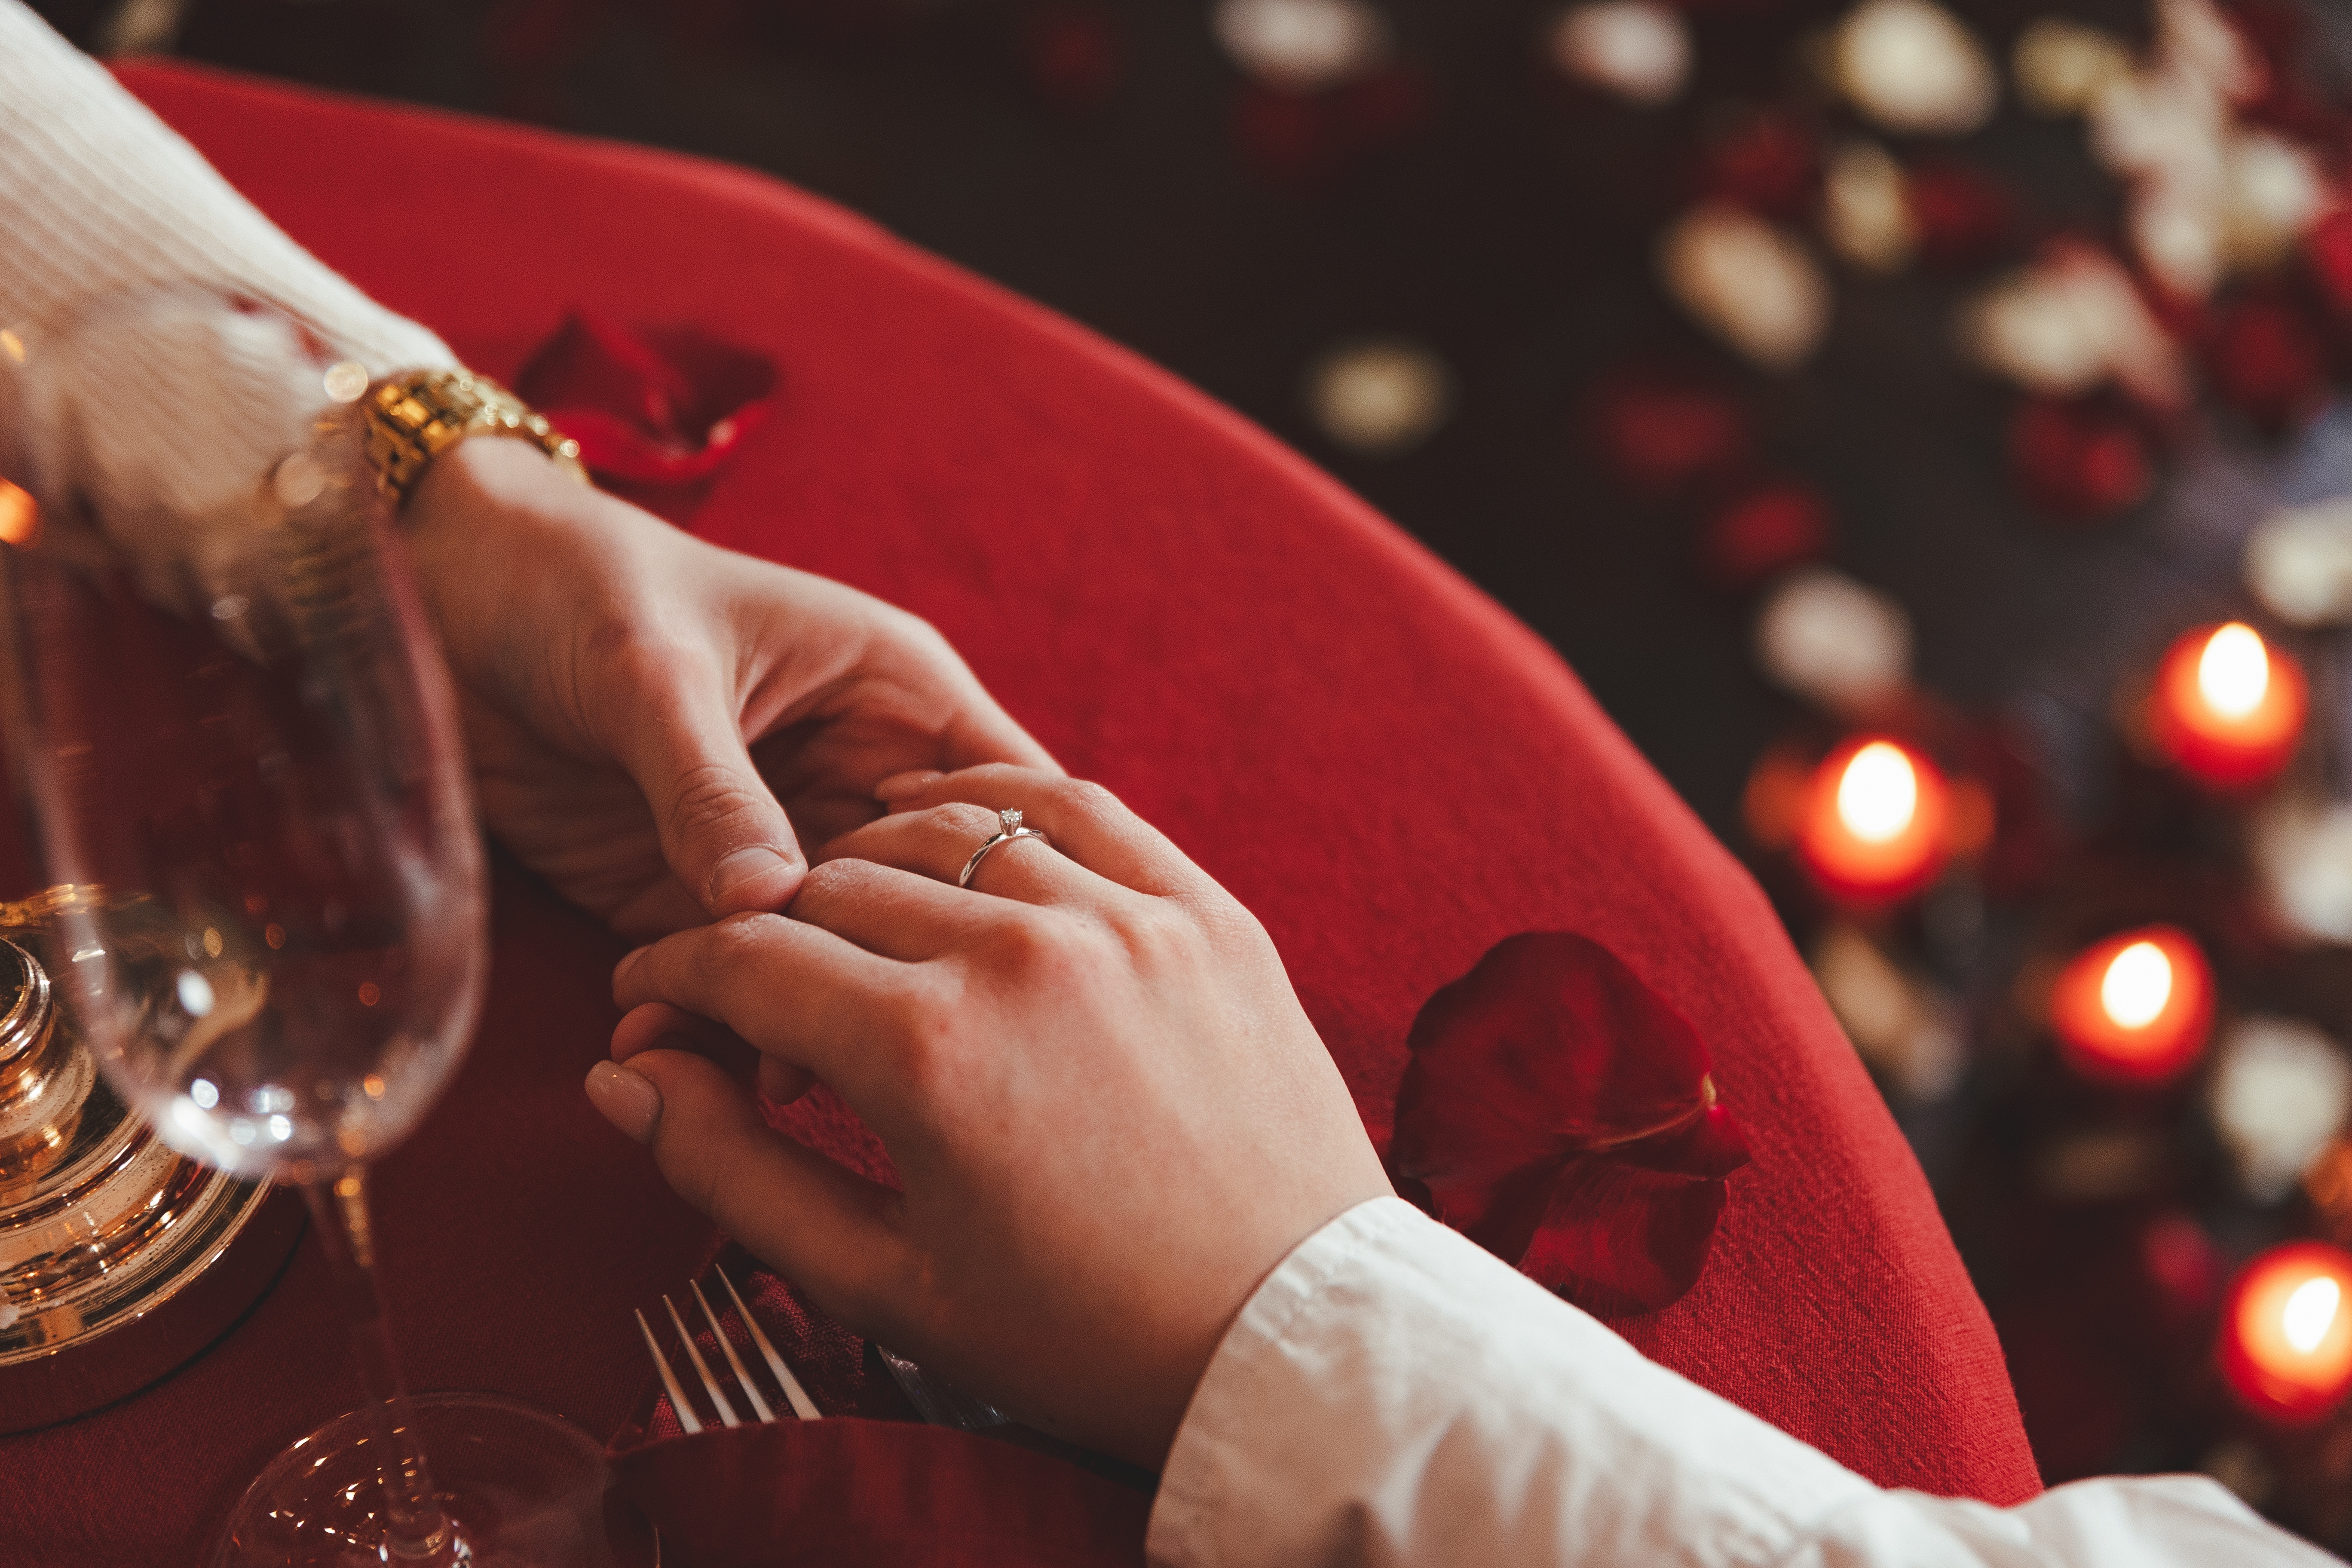 A couple holding hands during a romantic dinner date | Source: Shutterstock